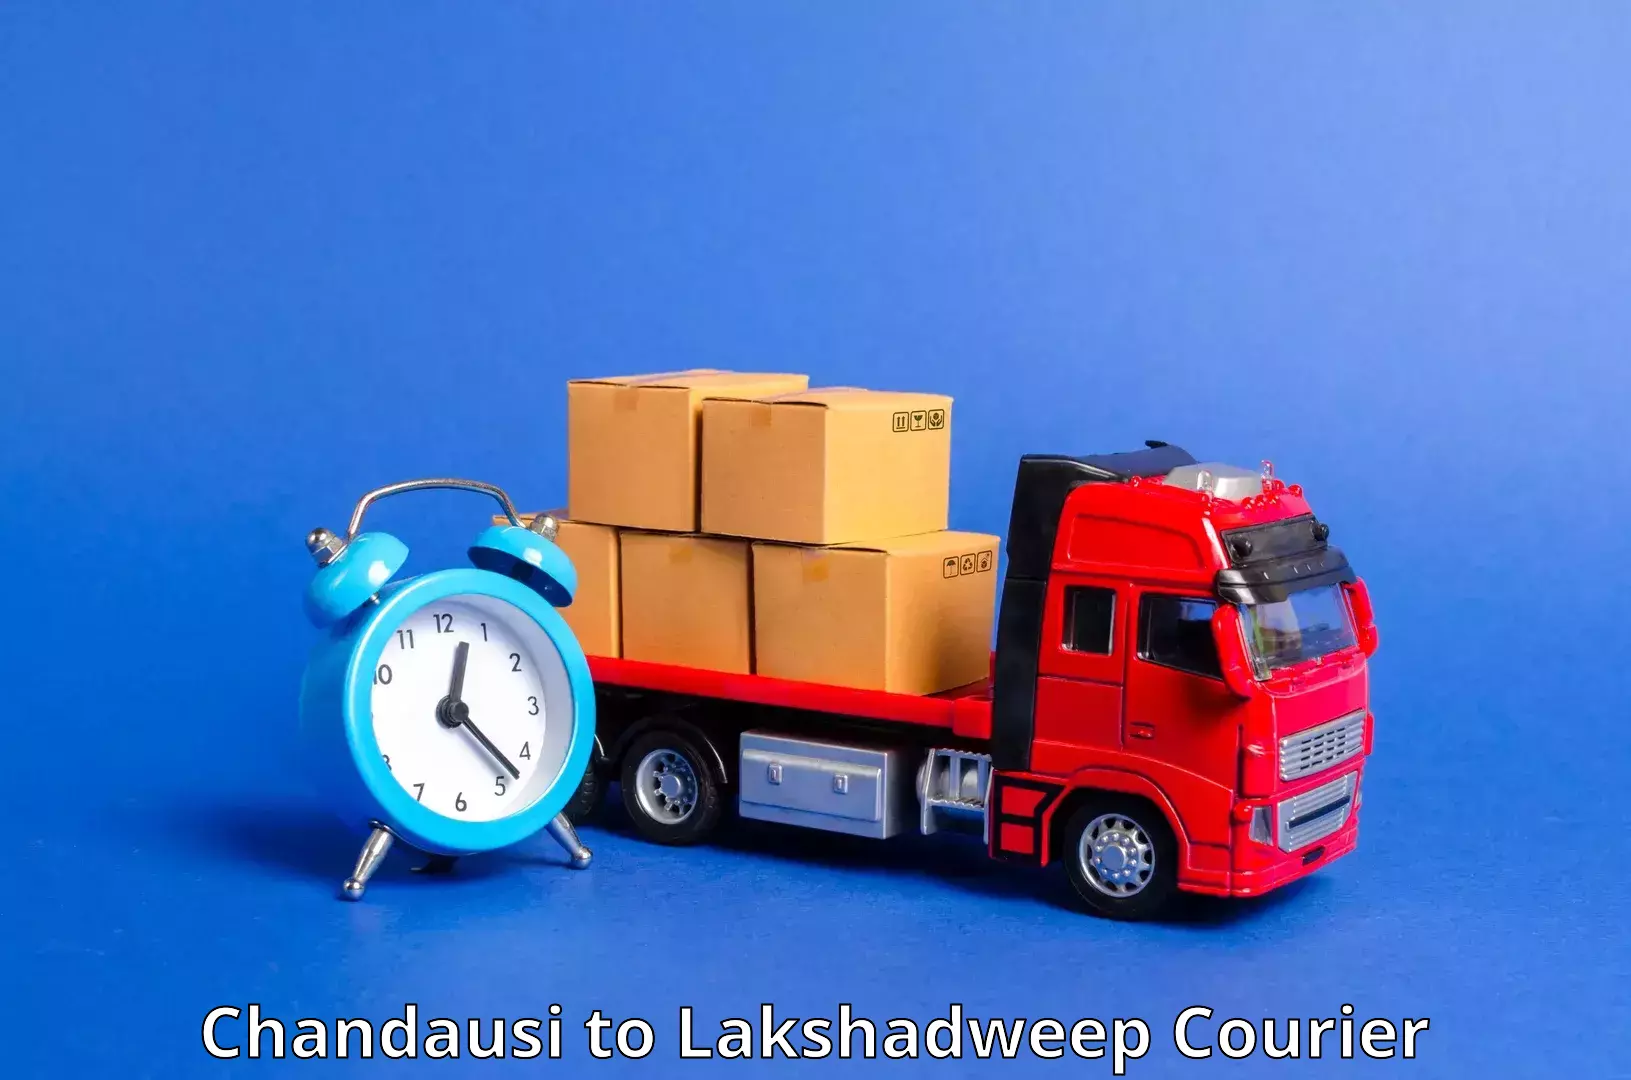 Full-service courier options Chandausi to Lakshadweep